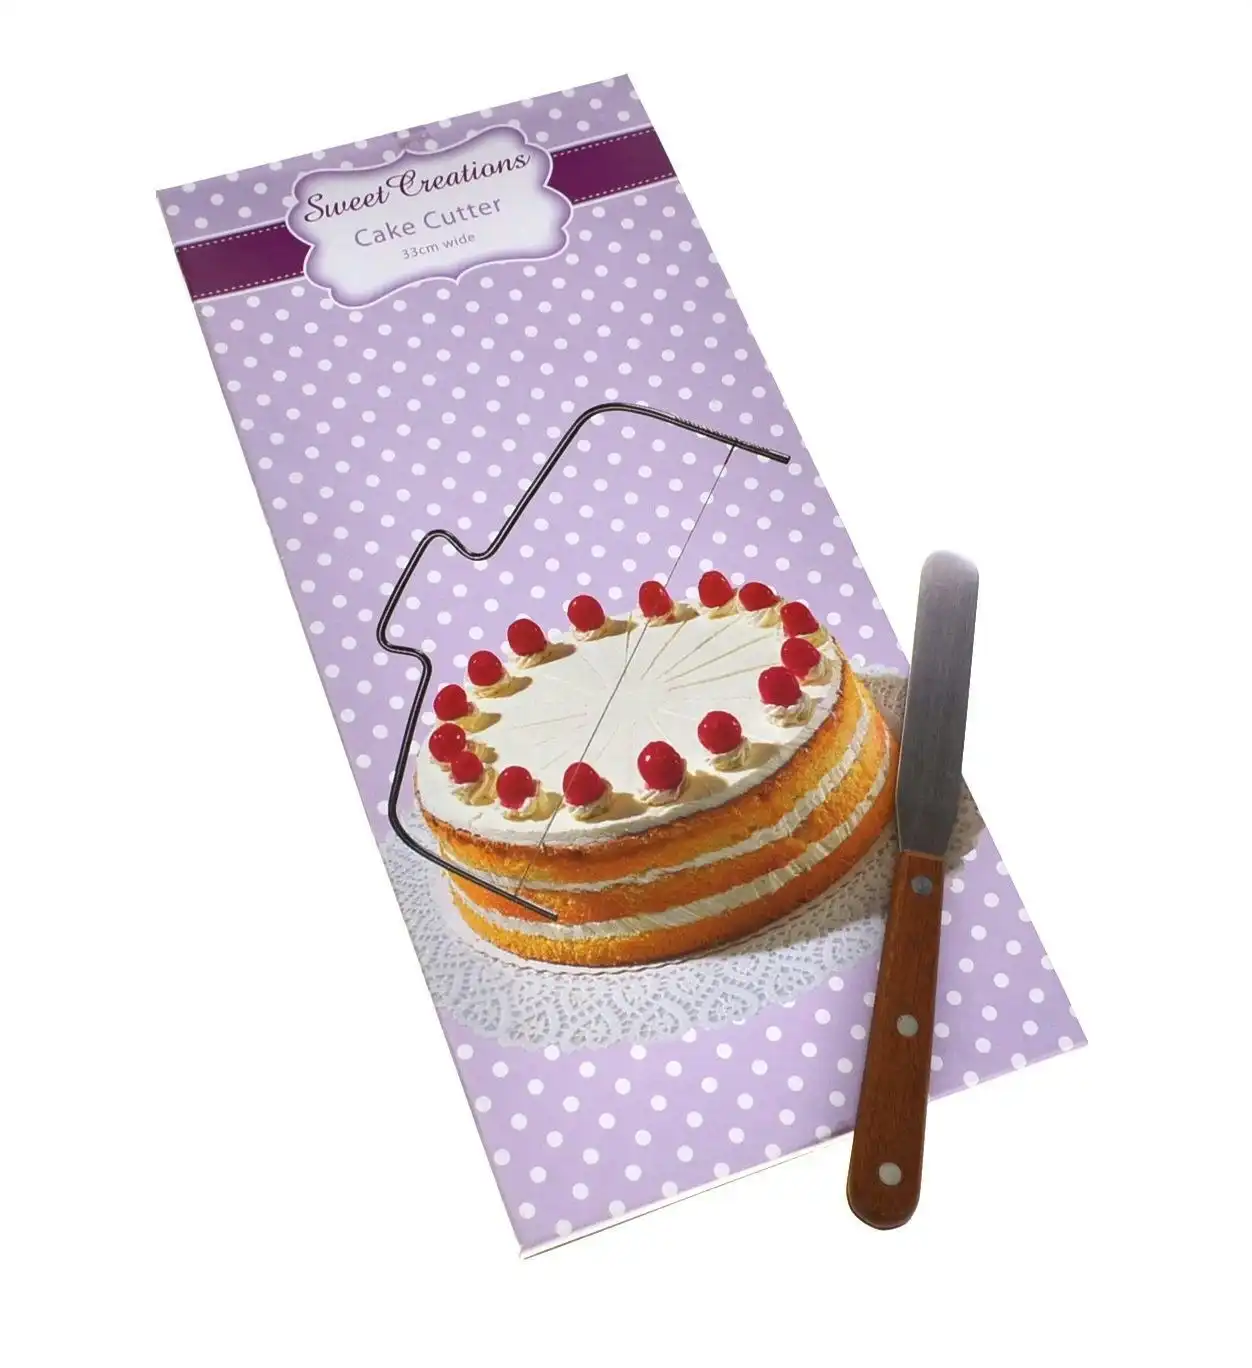 Cake Cutter And 11cm Flat Palette Knife